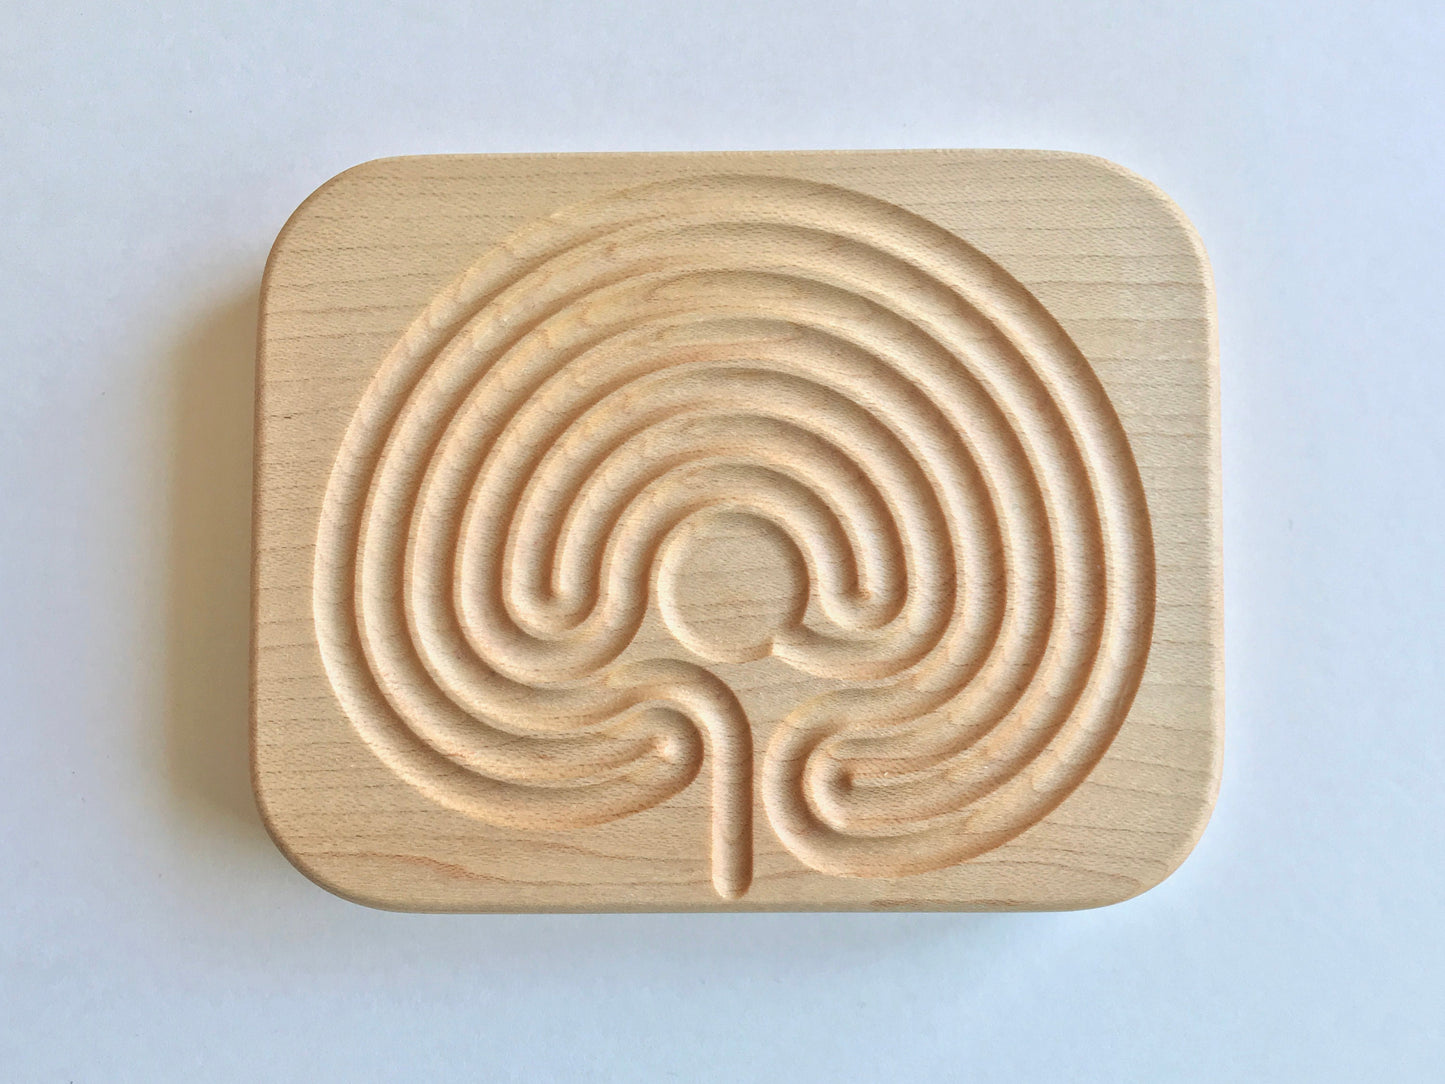 Small Classical Finger Labyrinth, Maple Wood, 4.75" by 3.75"